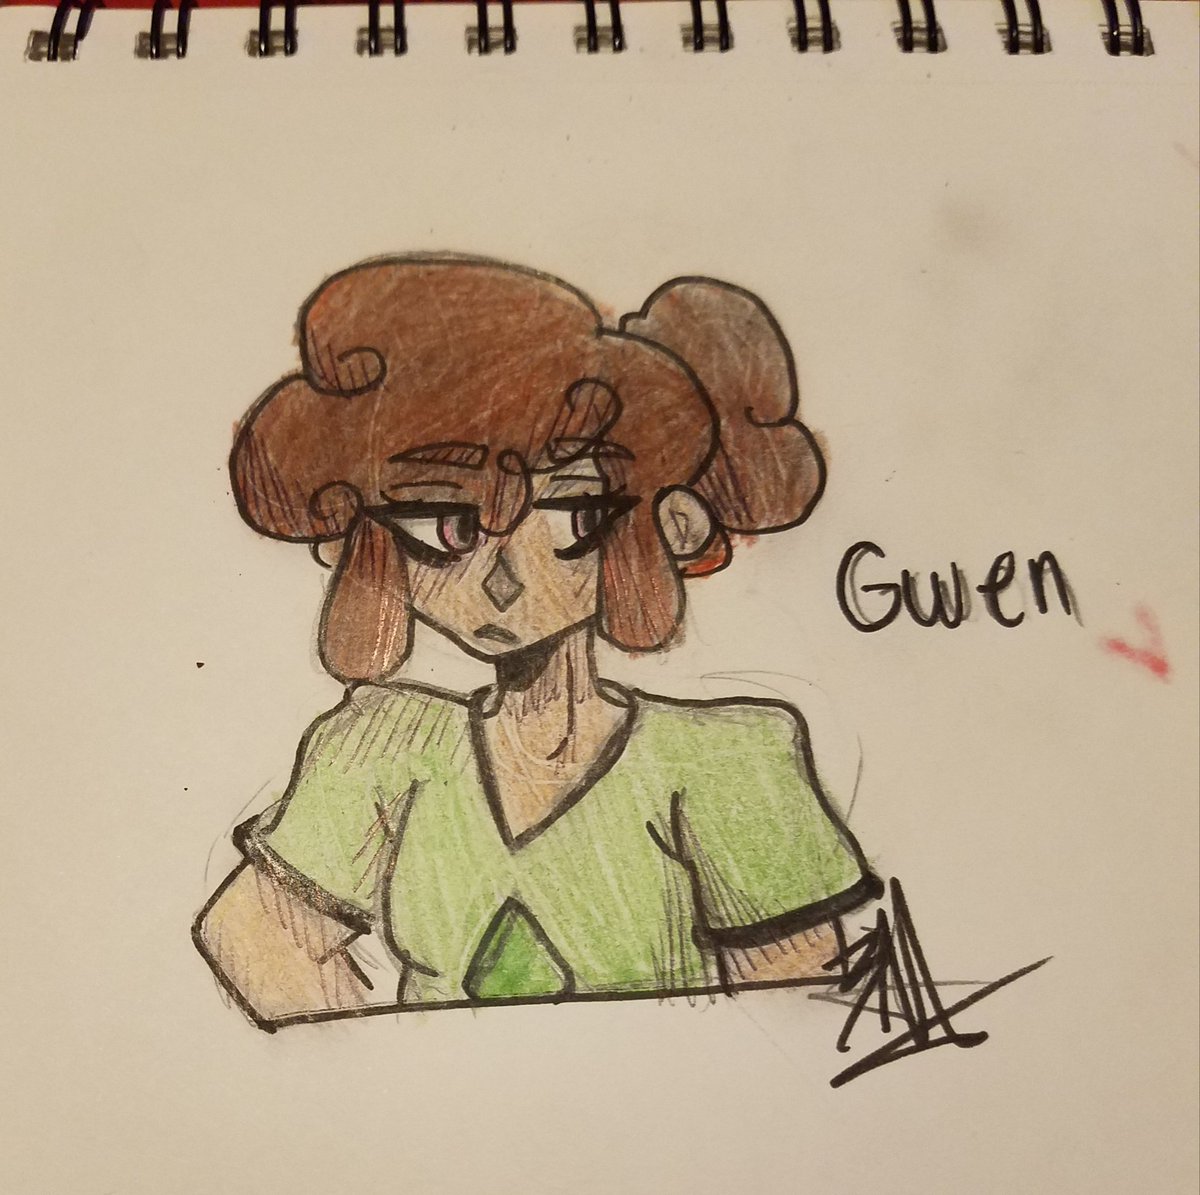 I recently been in love with #CampCamp again!! So have some, Gwen ♡ 

#gwencampcamp #art #fanart #fandom